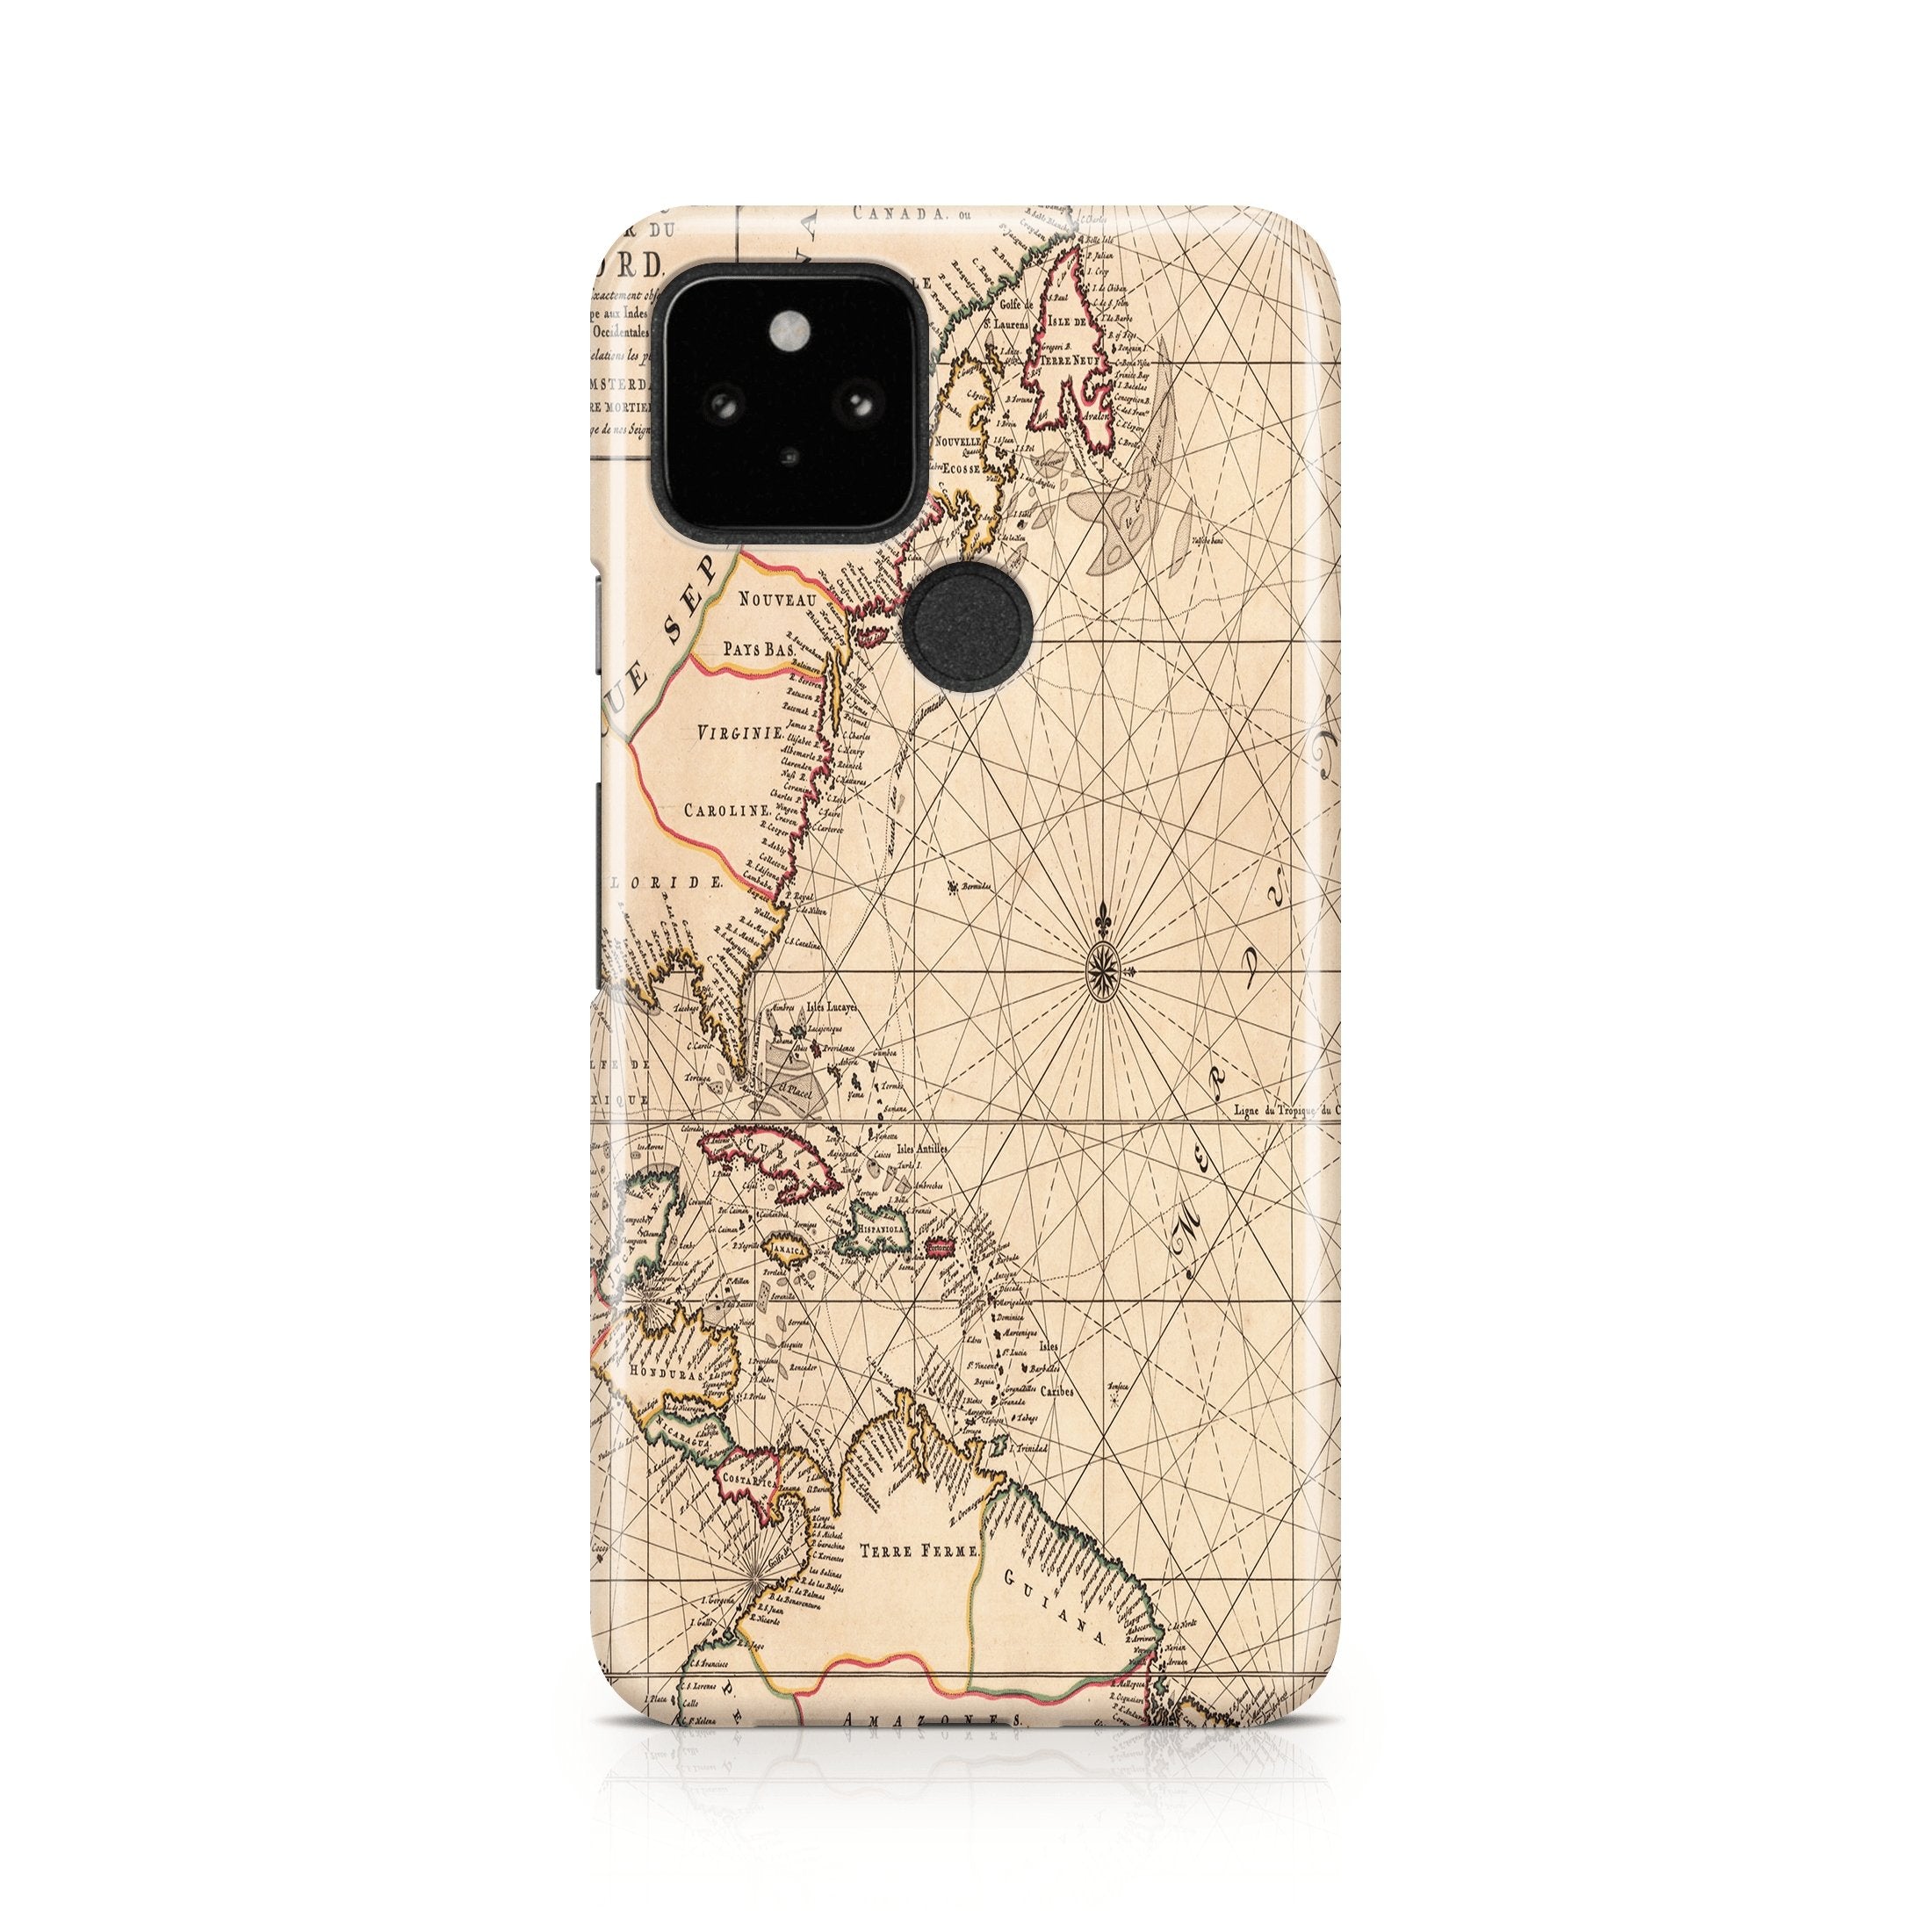 Explorer - Google phone case designs by CaseSwagger